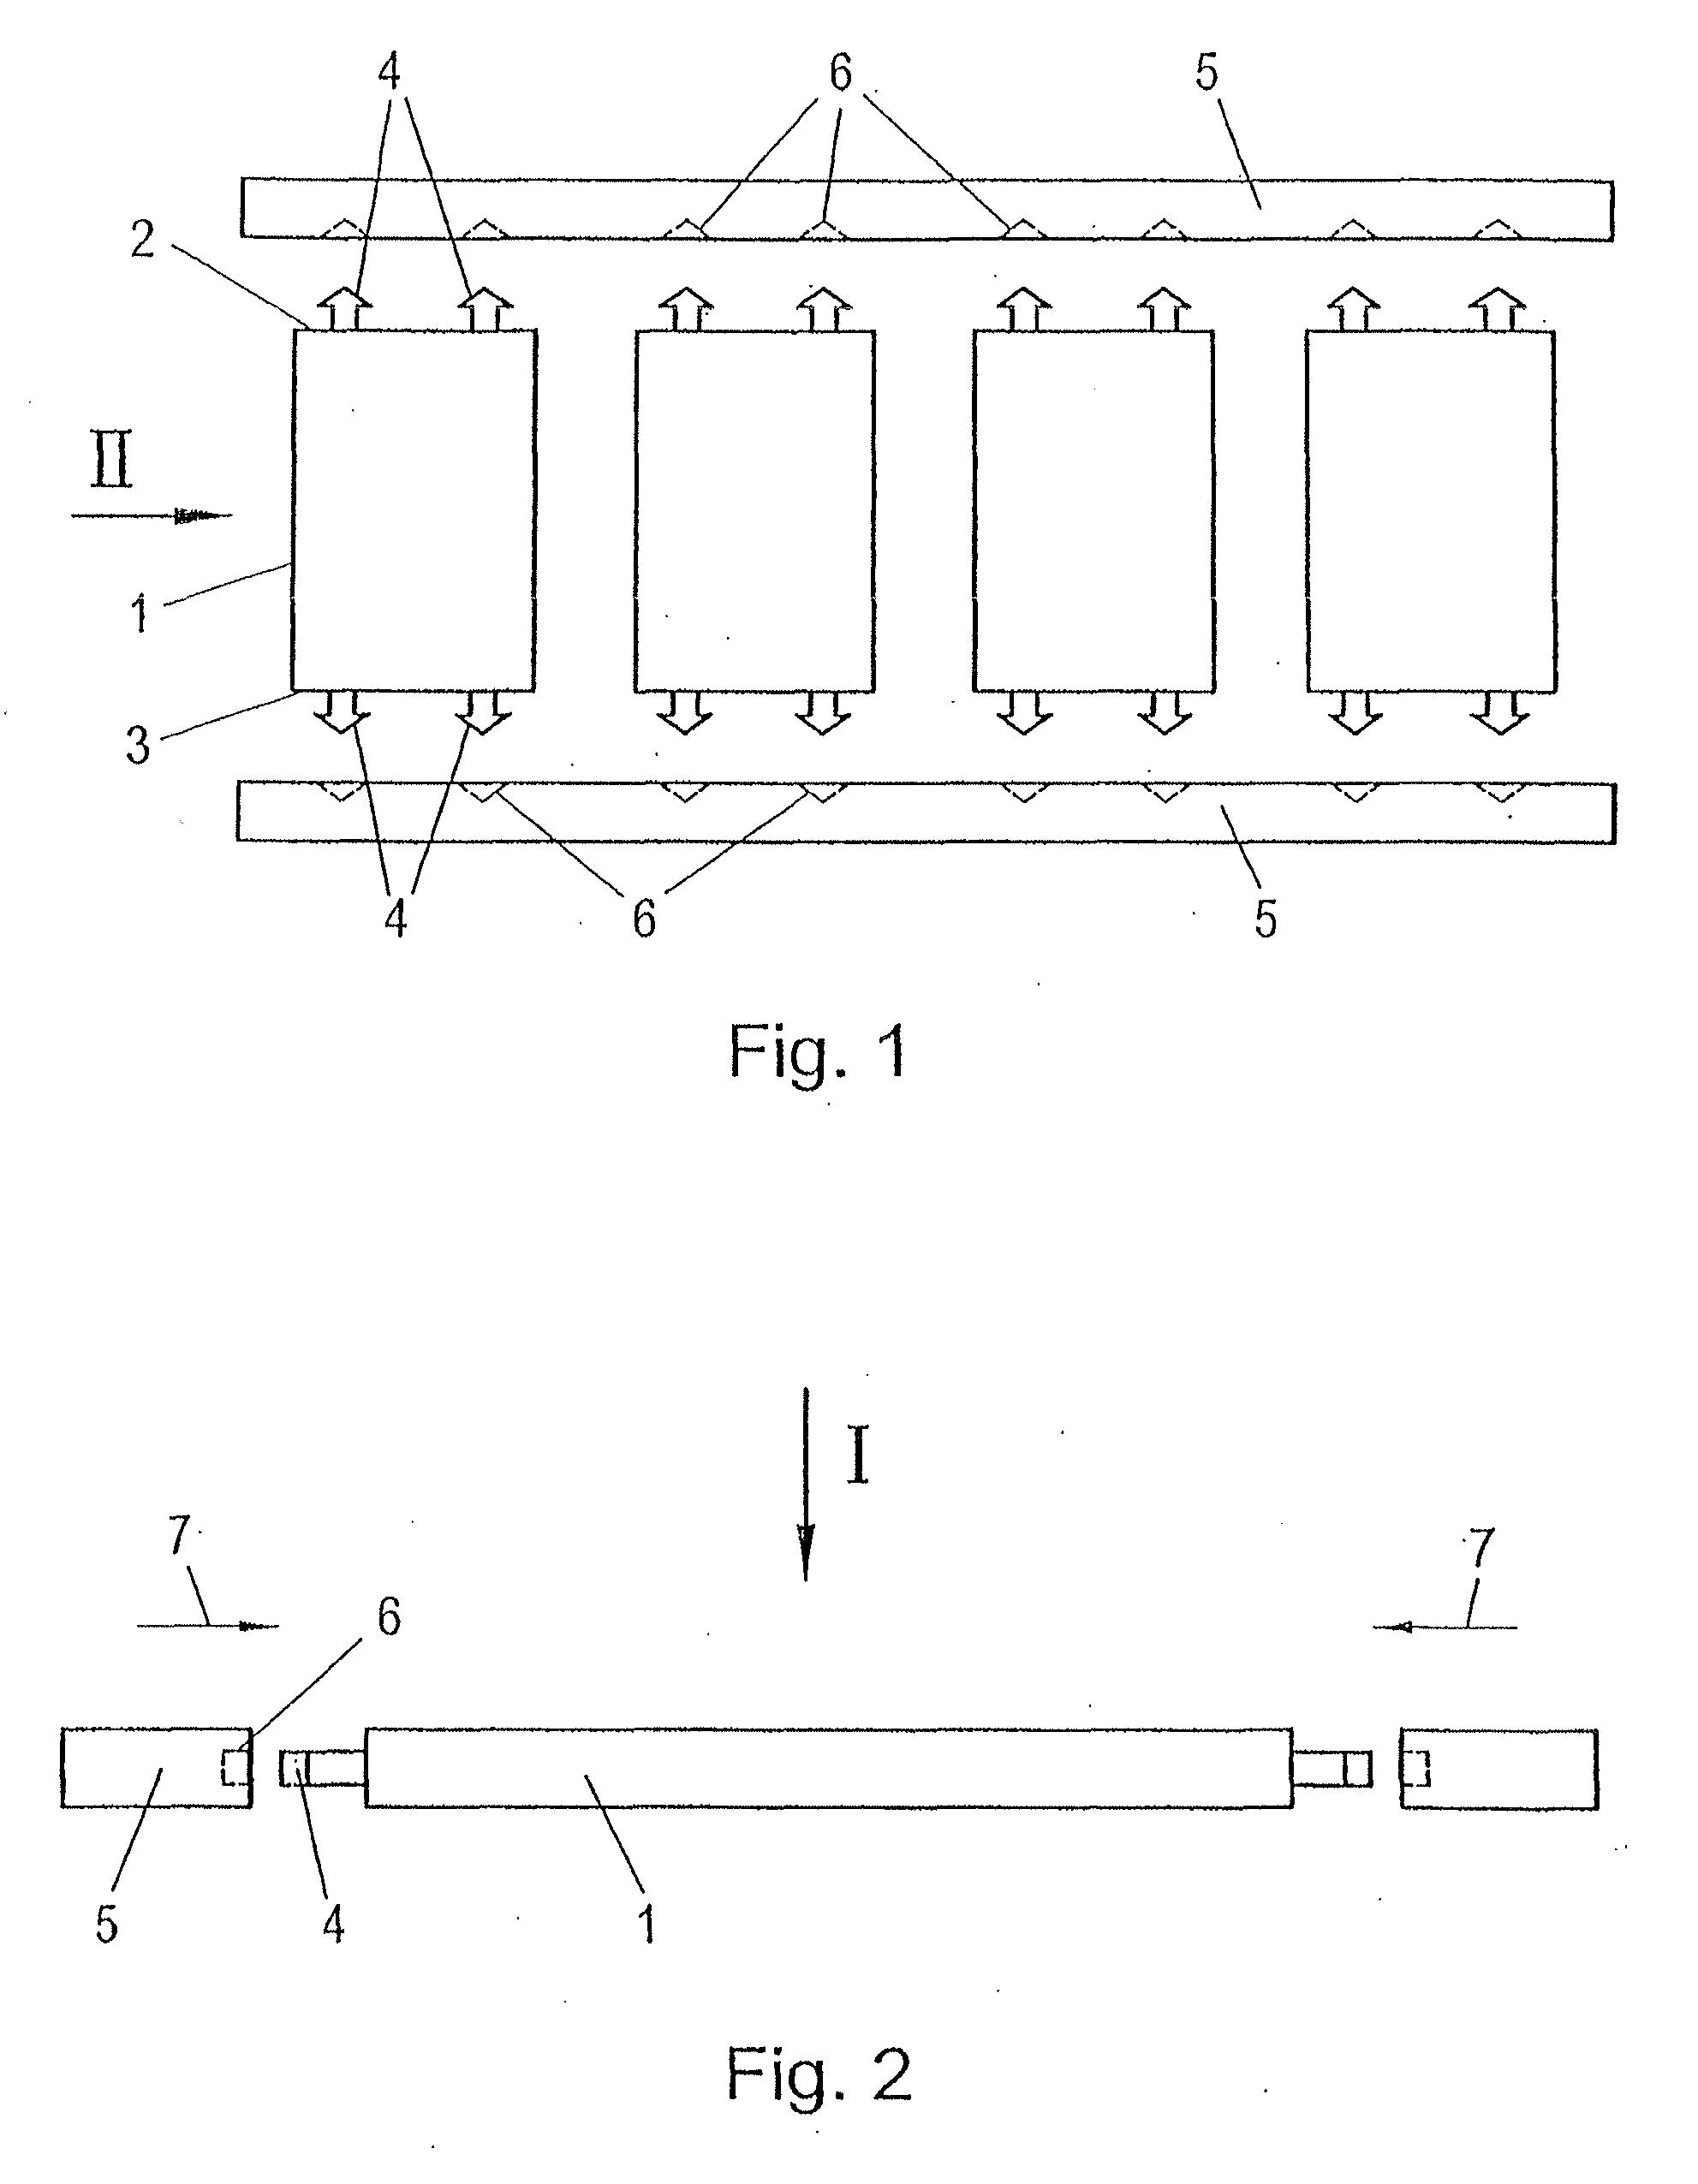 Meth0d and system for connecting a plurality of printed circuit boards to at least one frame or carrier element and printed circuit board and frame or carrier element